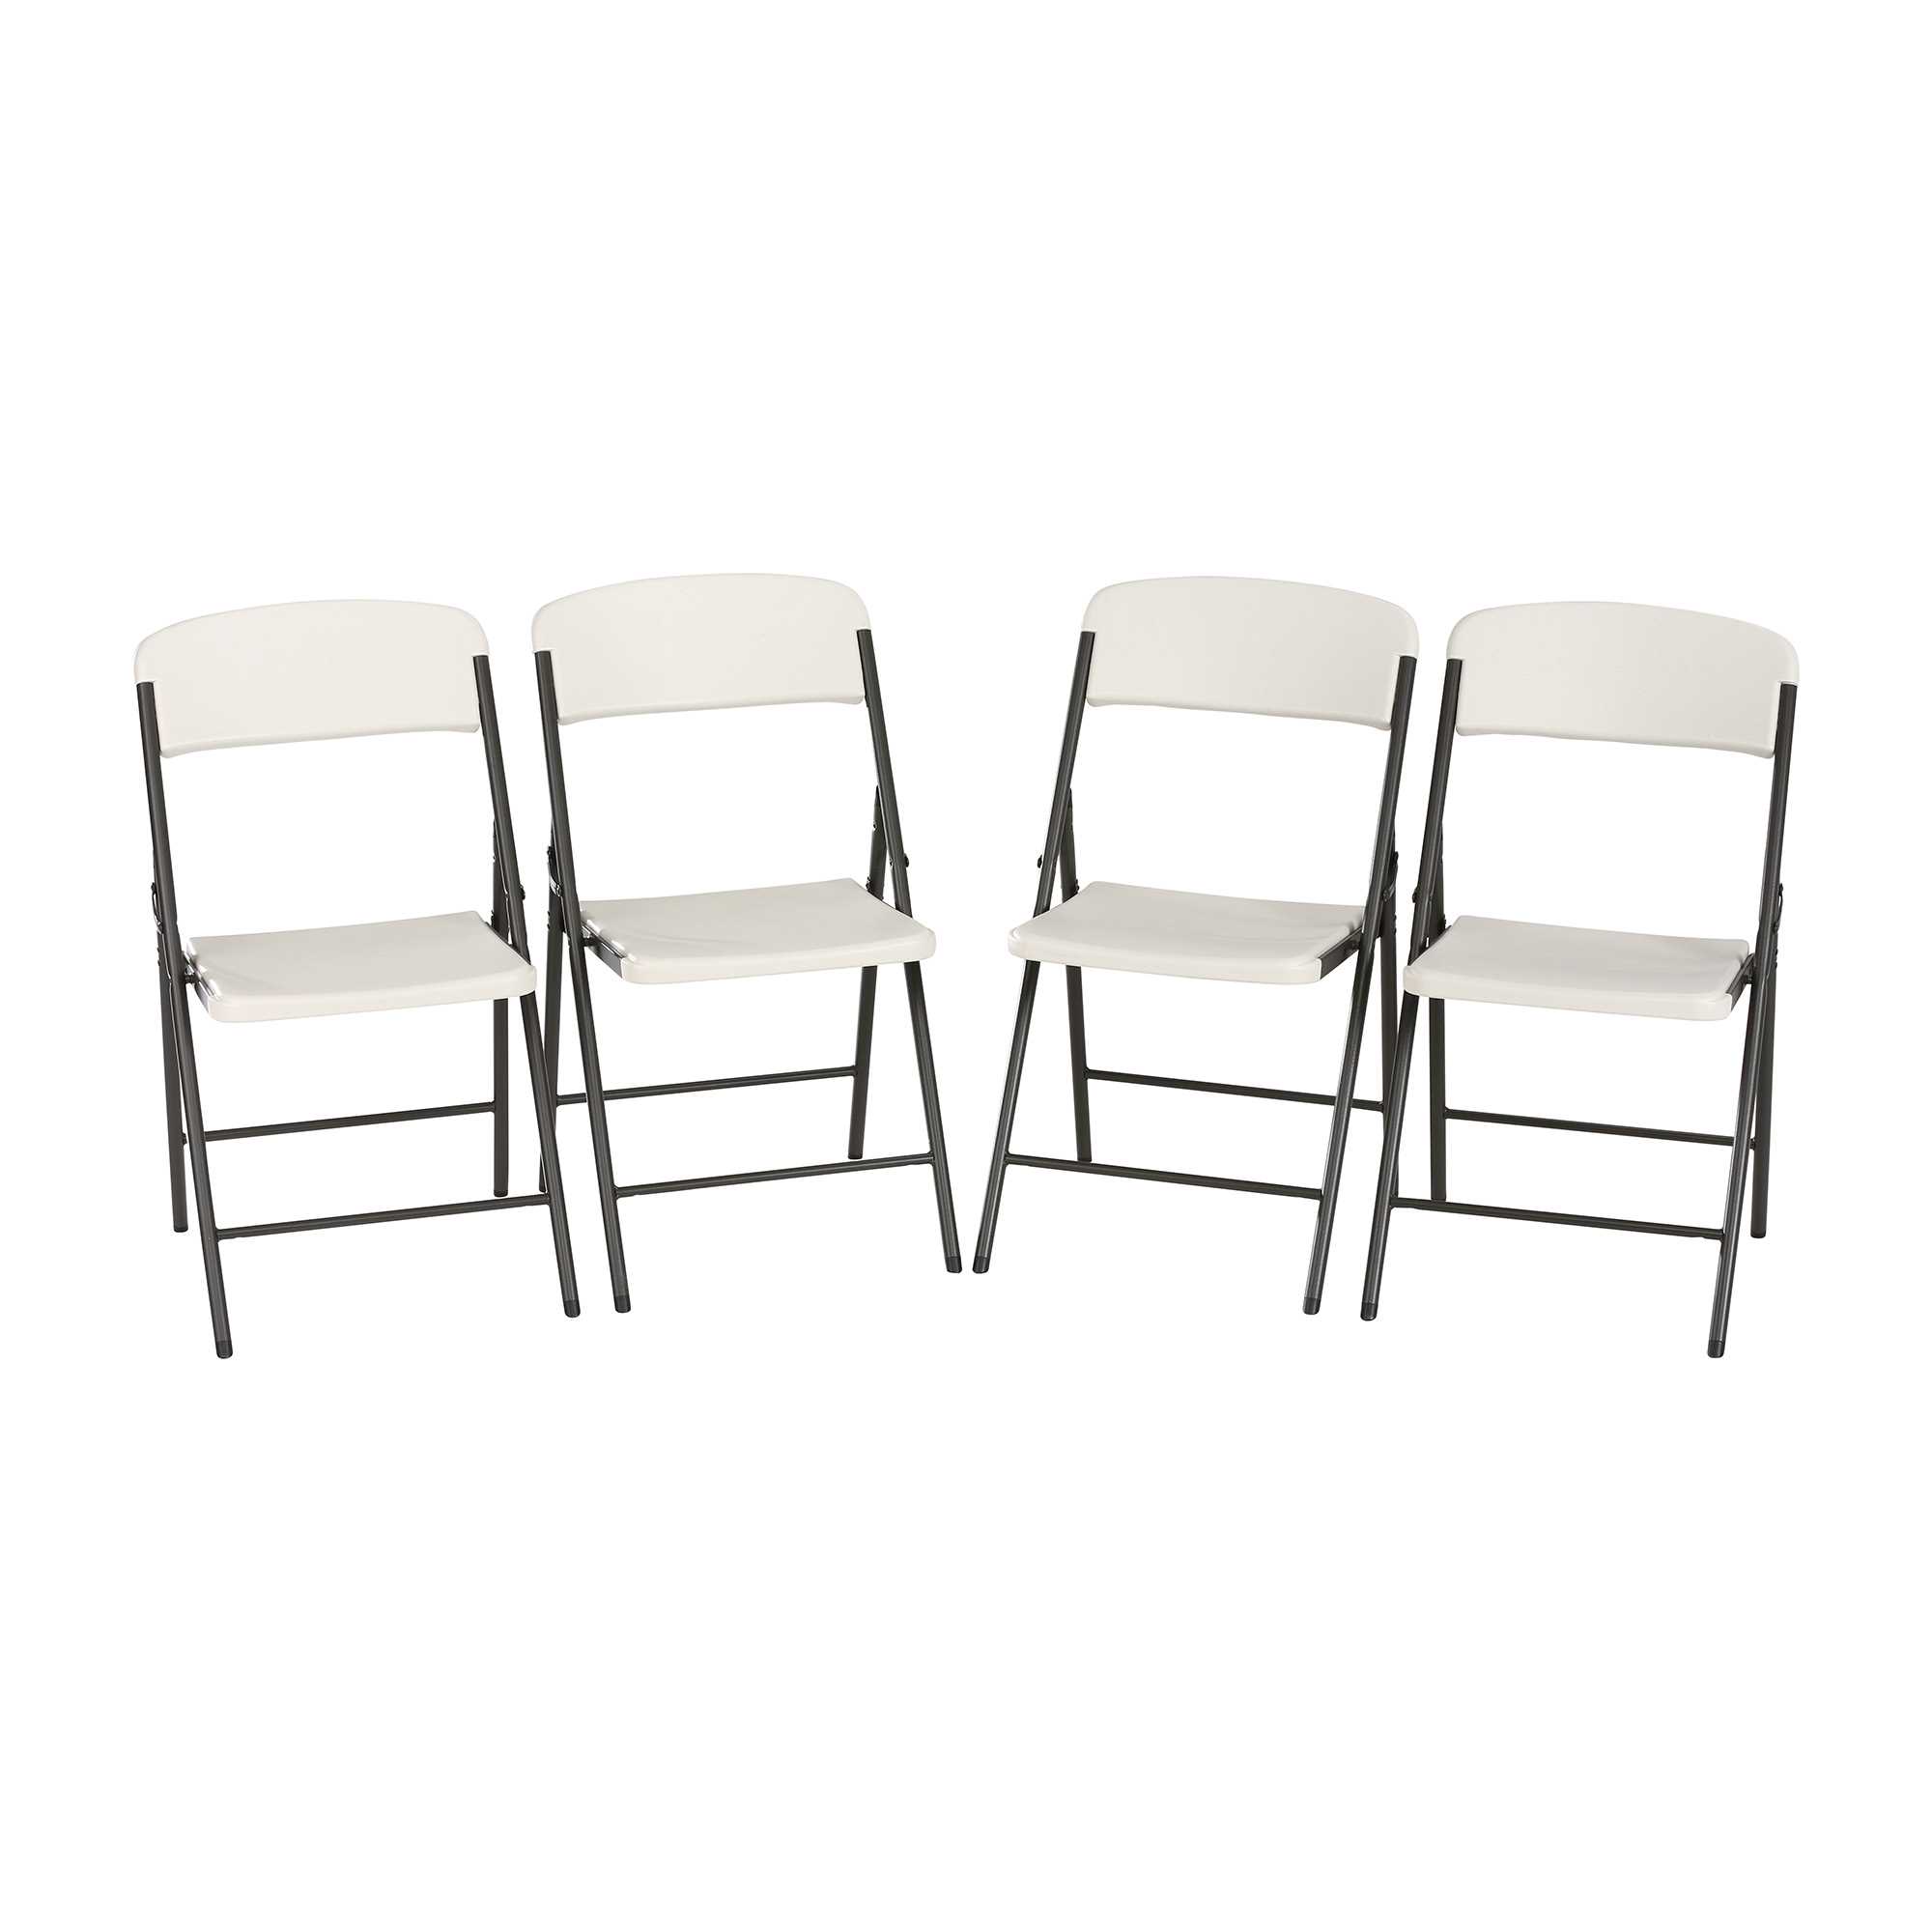 Contemporary folding chair (white)